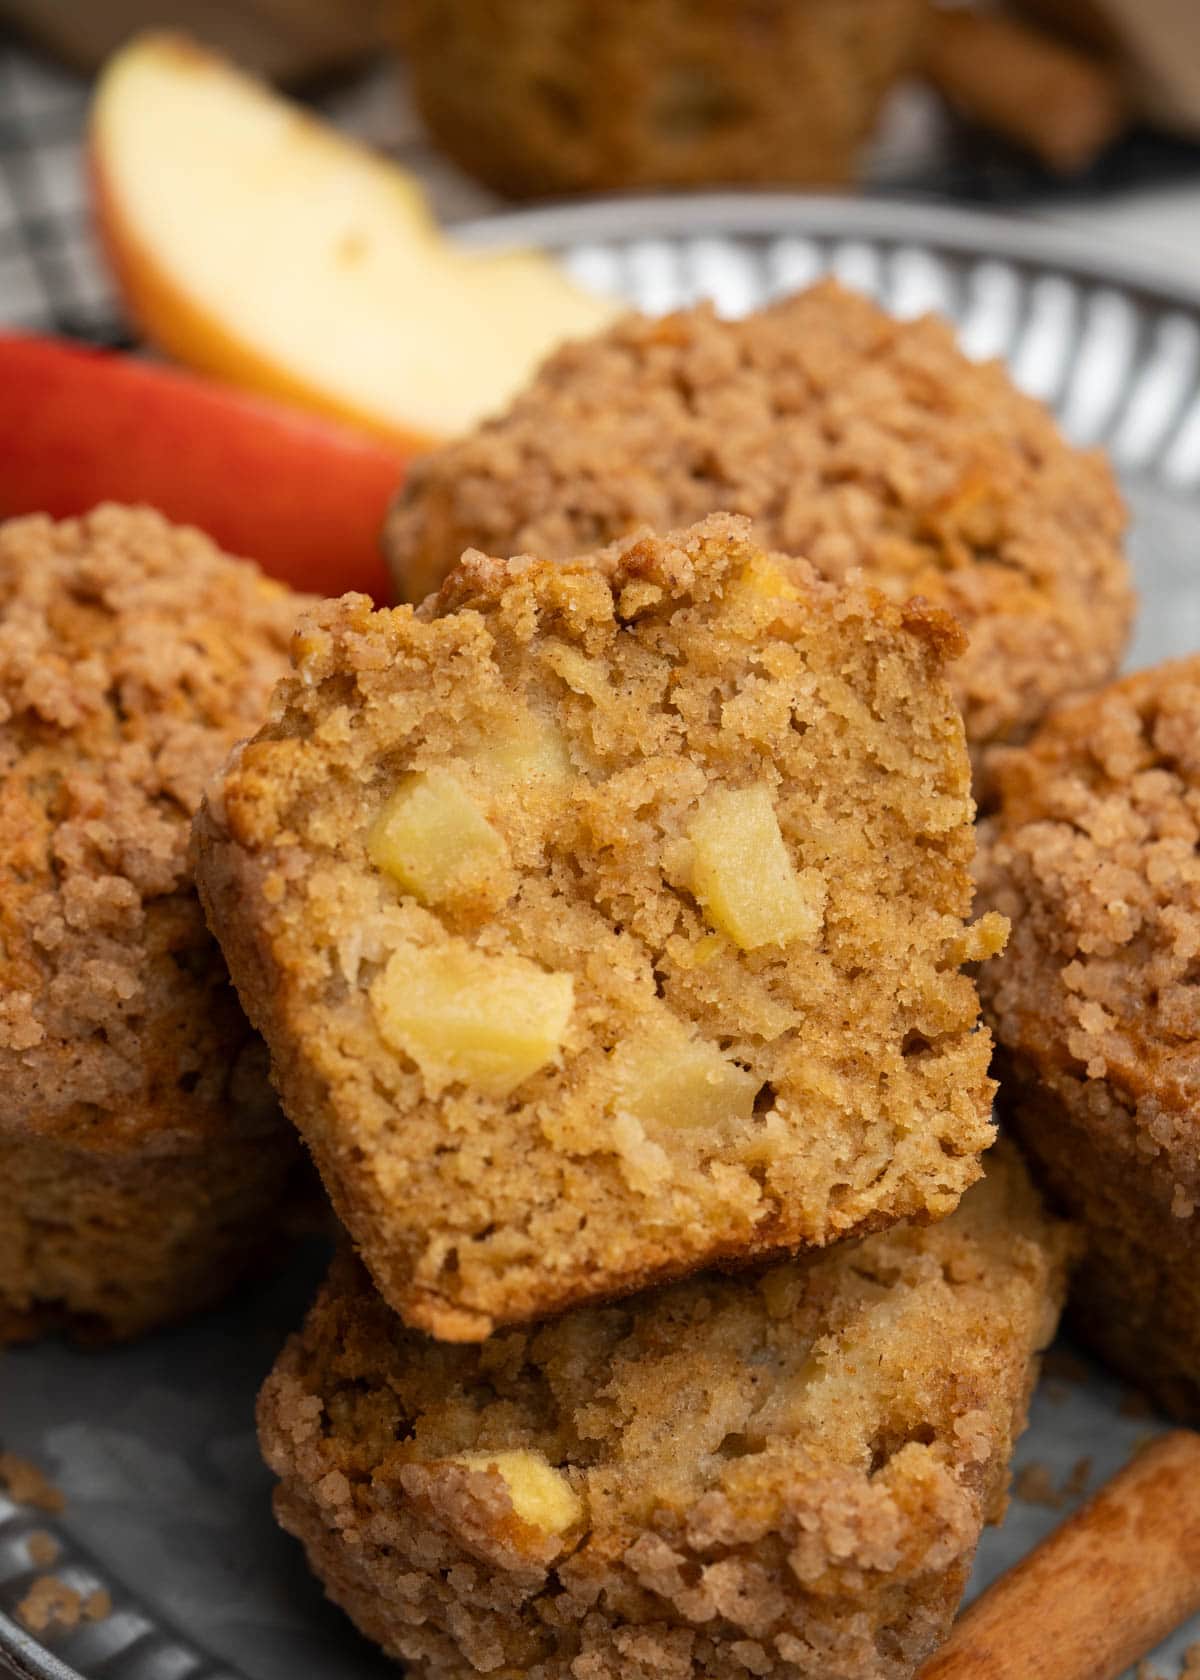 Cross section of apple muffins showing chunks of apple and moist tender crumbs